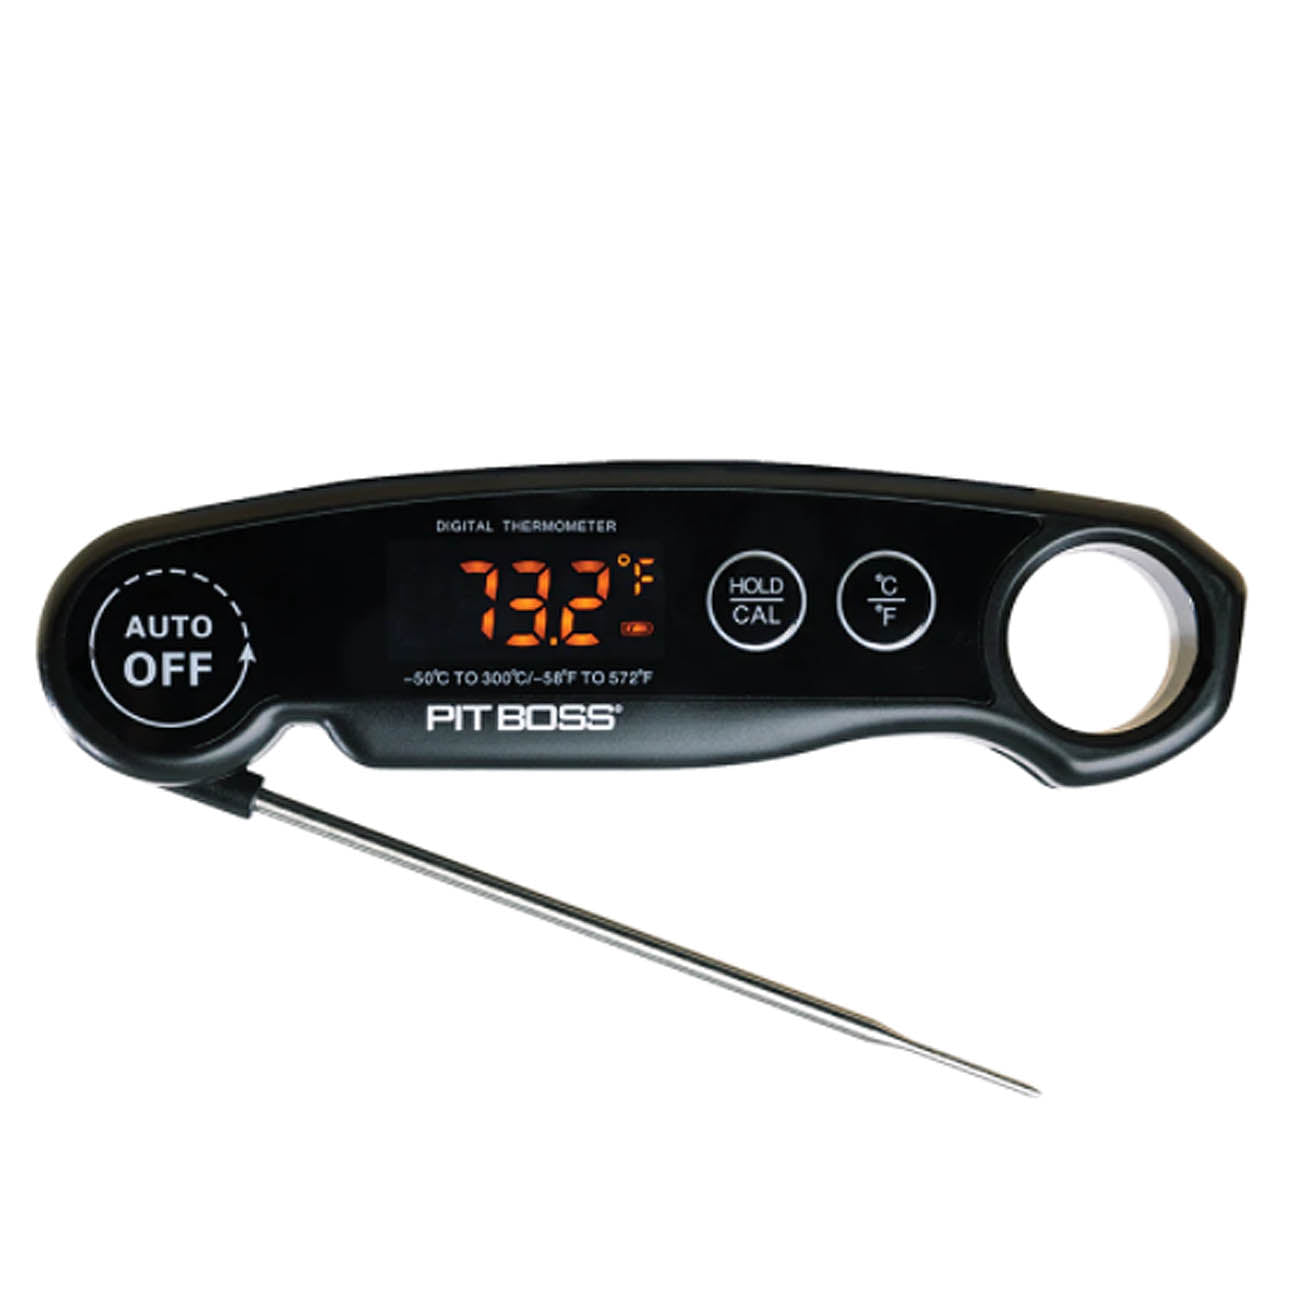 Pit Boss Digital Meat Thermometer LED Display 550 Degrees Fahrenheit Max 40853